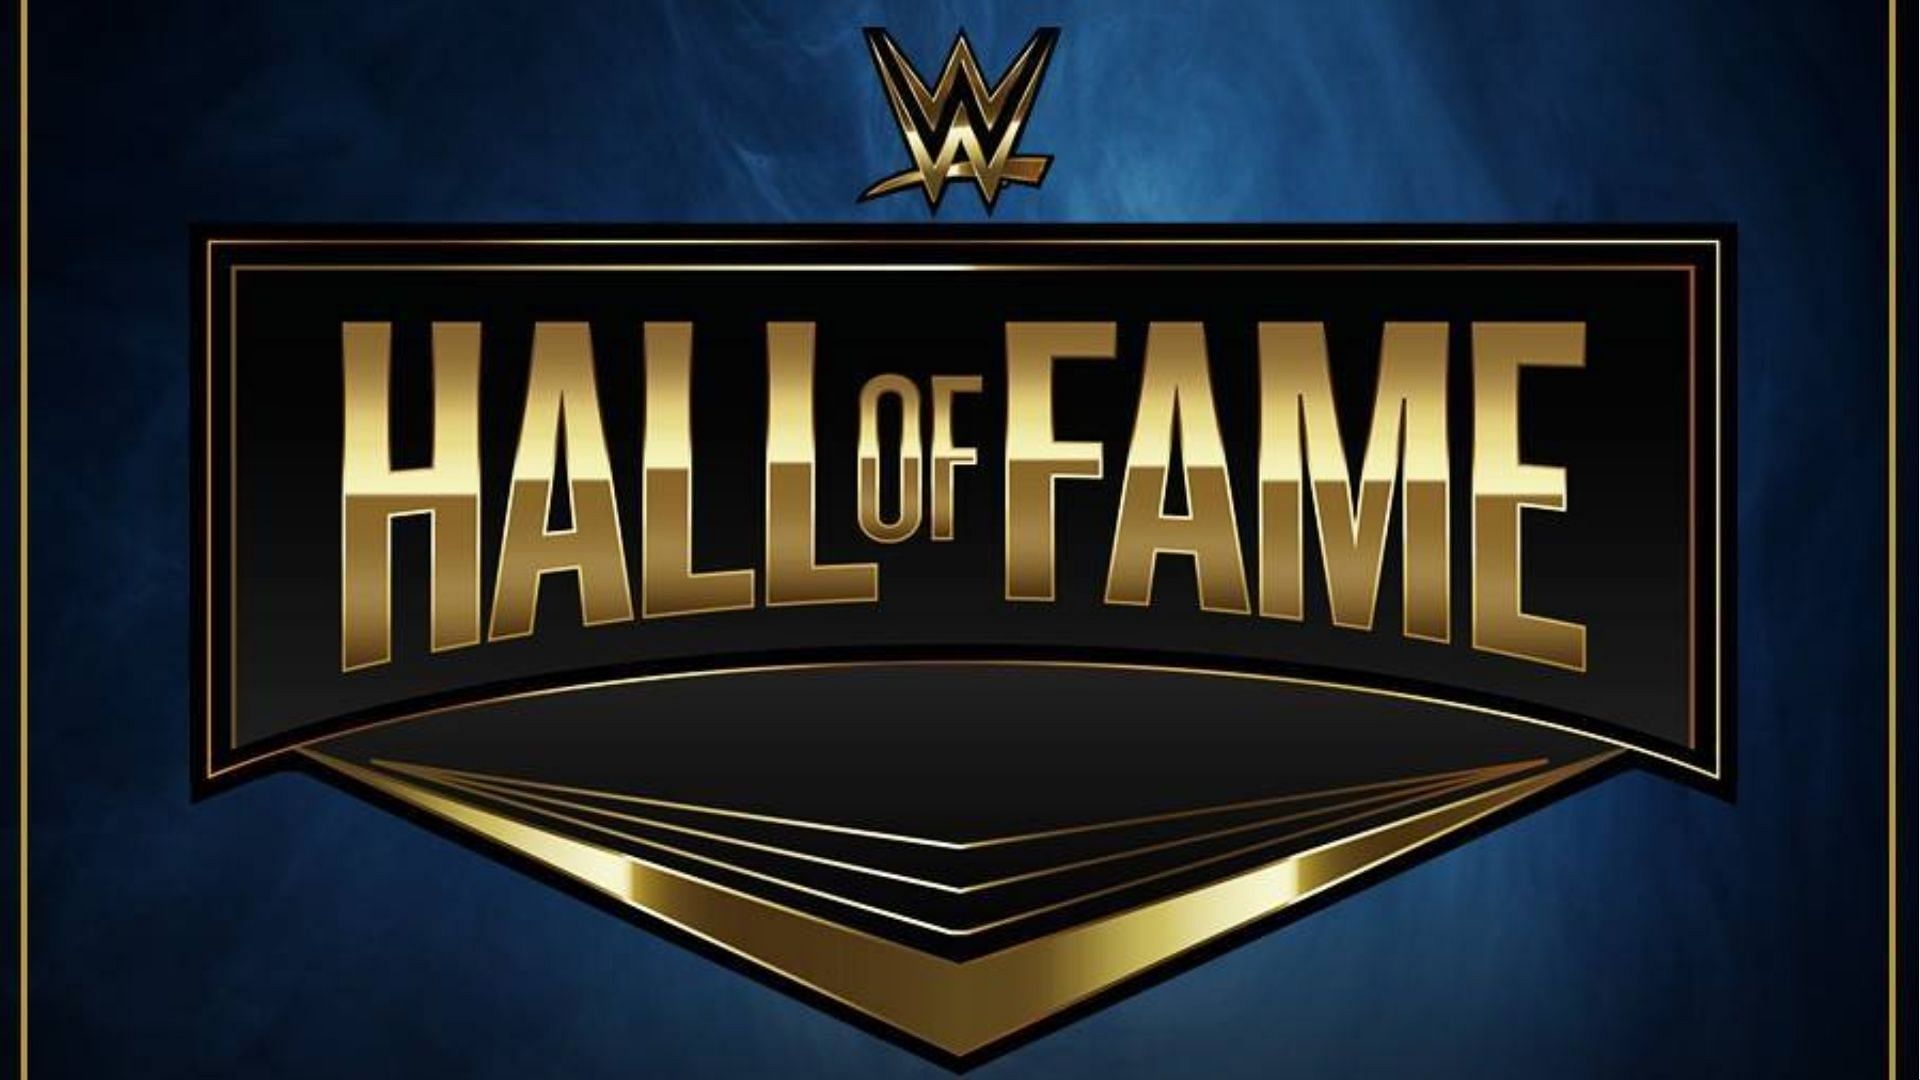 WWE has been using this Hall of Fame logo since 2019.